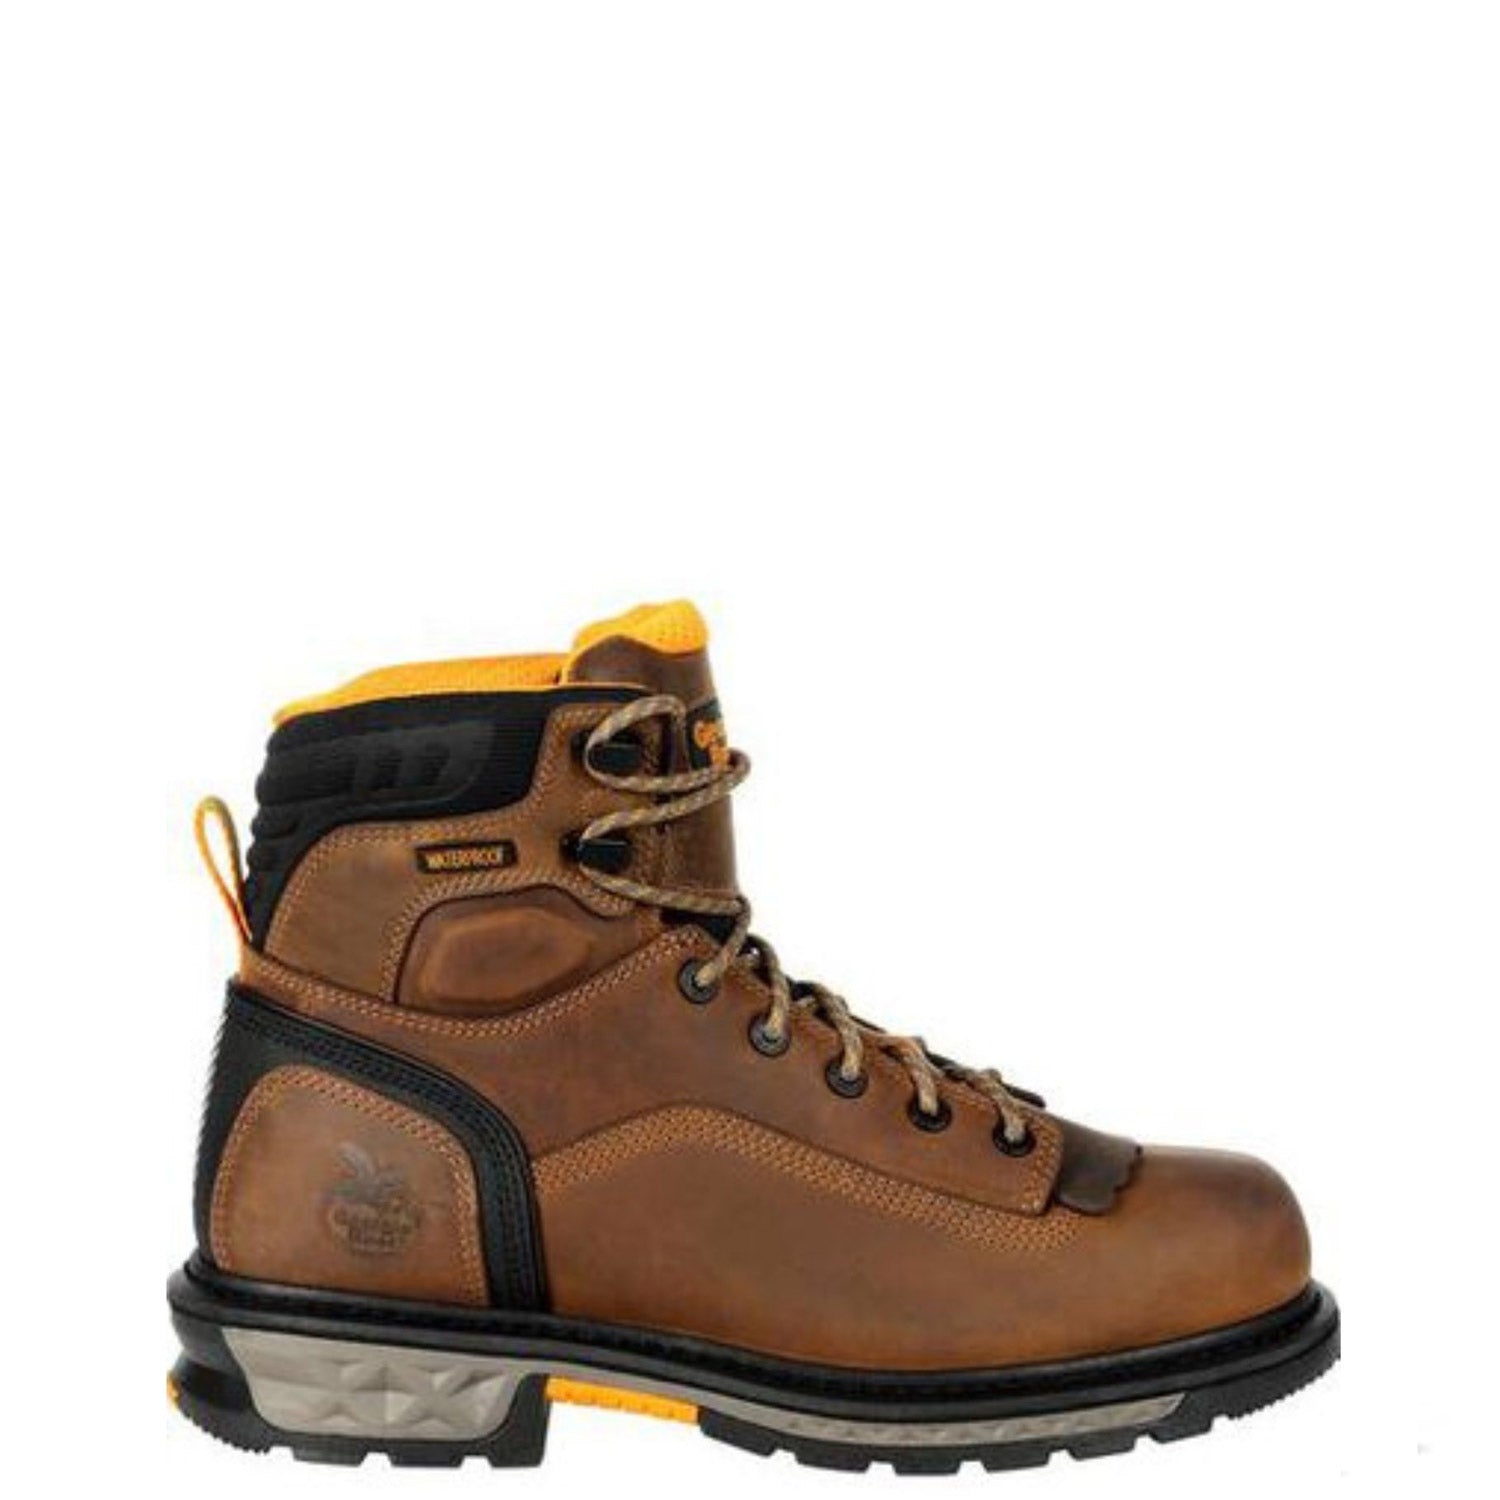 Georgia Boot Men's 6" Carbo-Tec LTX Waterproof EH Comp Toe Work Boot - Work World - Workwear, Work Boots, Safety Gear